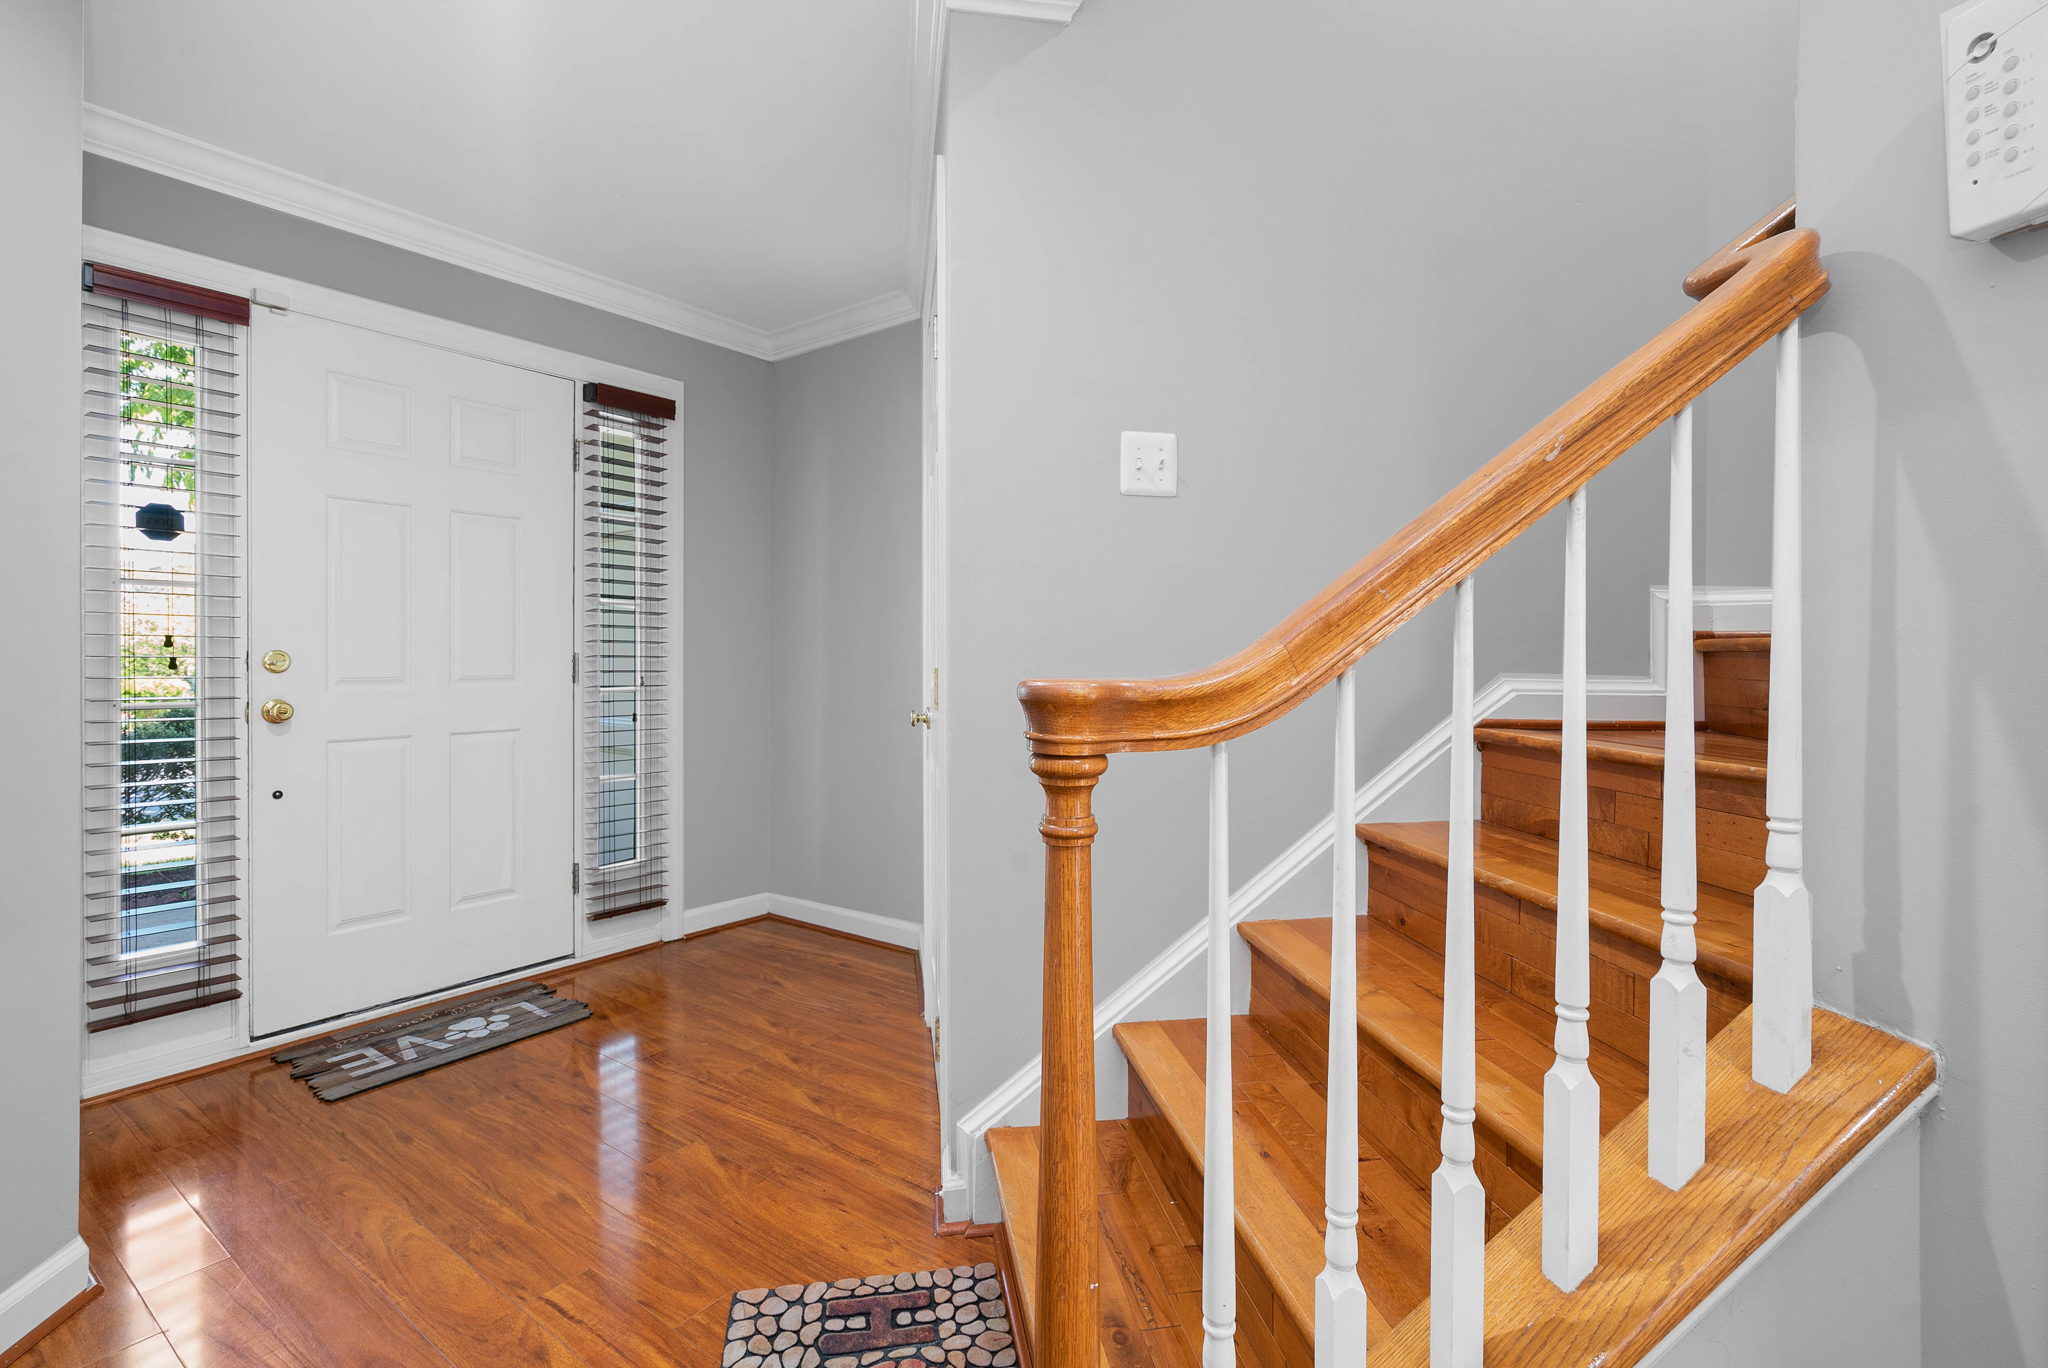 19 Chatterly Ct, Germantown, MD 20874, USA Photo 3